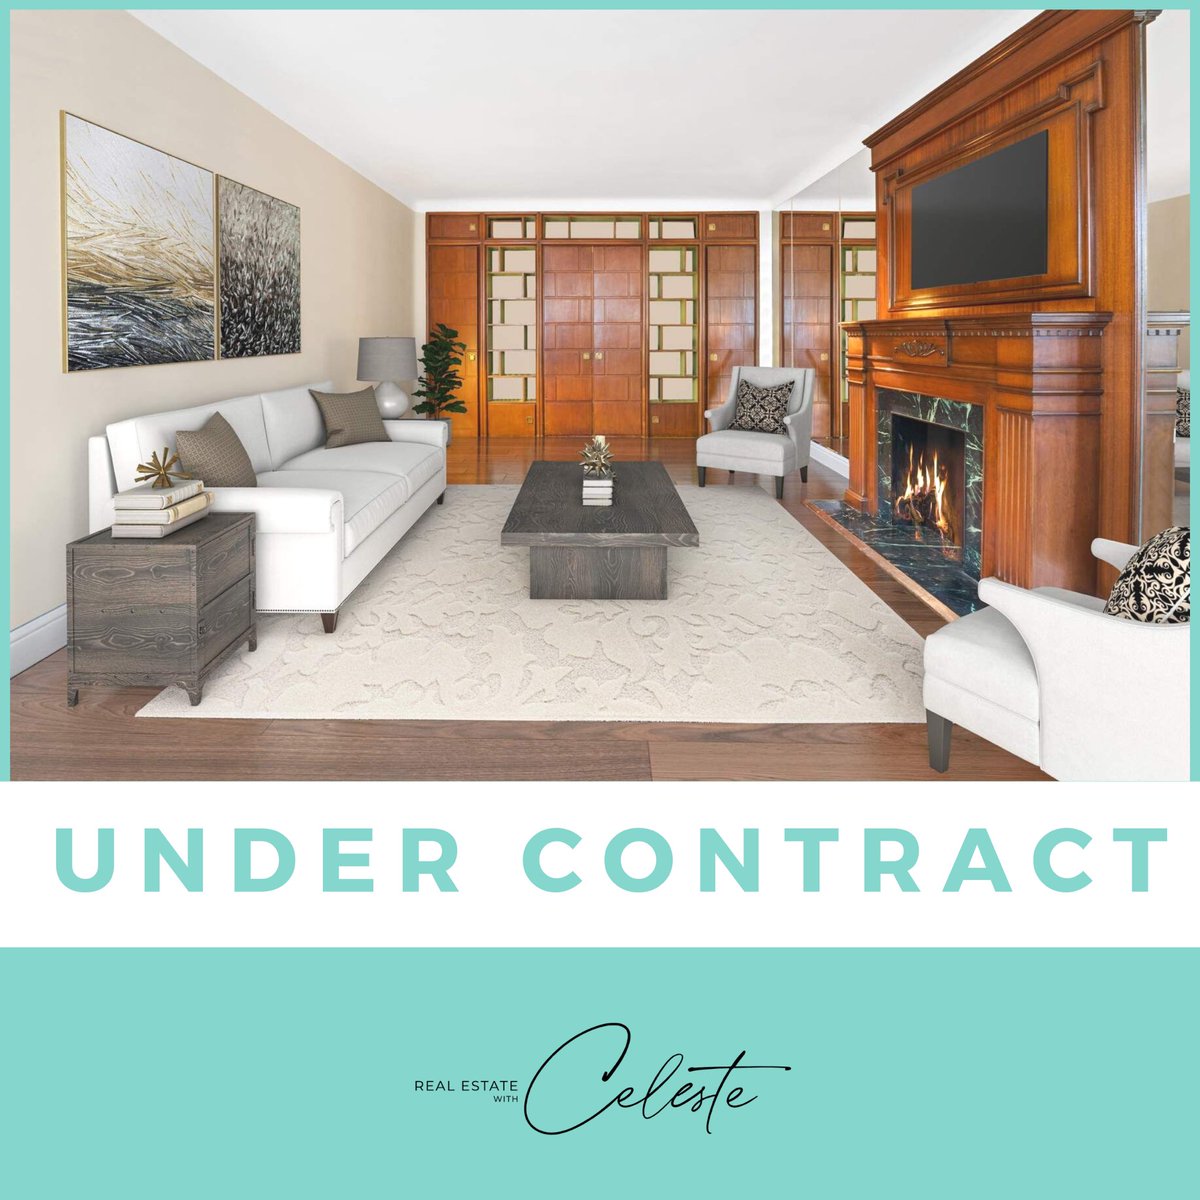 #INCONTRACT • The contract was signed, this huge 5 bed/3 bath #ProspectHeights home will soon have new owners! #nycrealestate